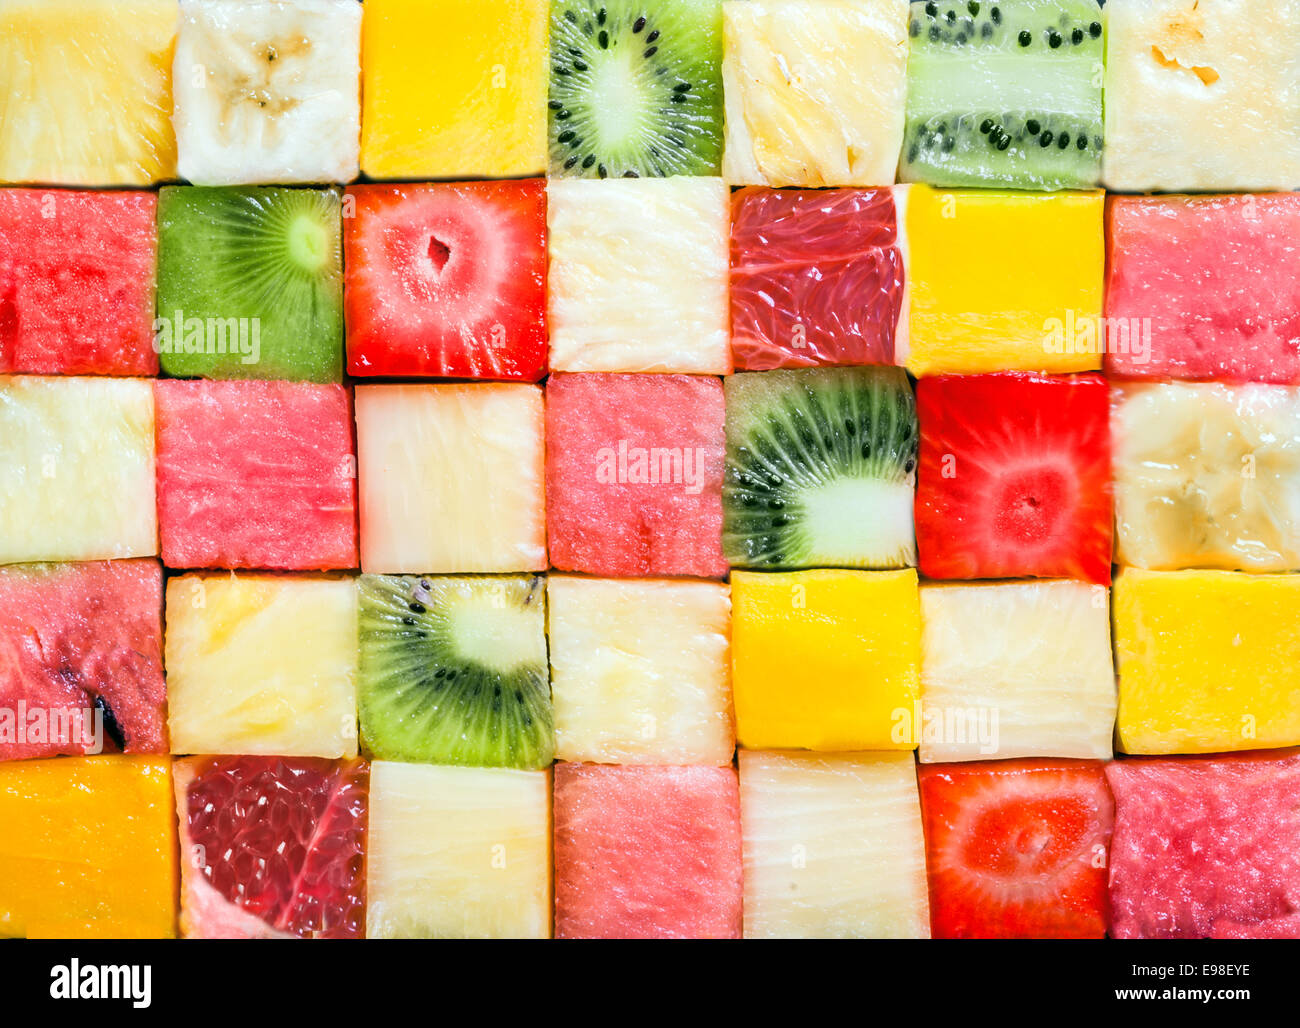 Seamless background pattern and texture of colourful fresh diced tropical fruit cubes arranged in a geometric pattern with melon, watermelon, banana, pineapple, strawberry, kiwifruit and grapefruit Stock Photo